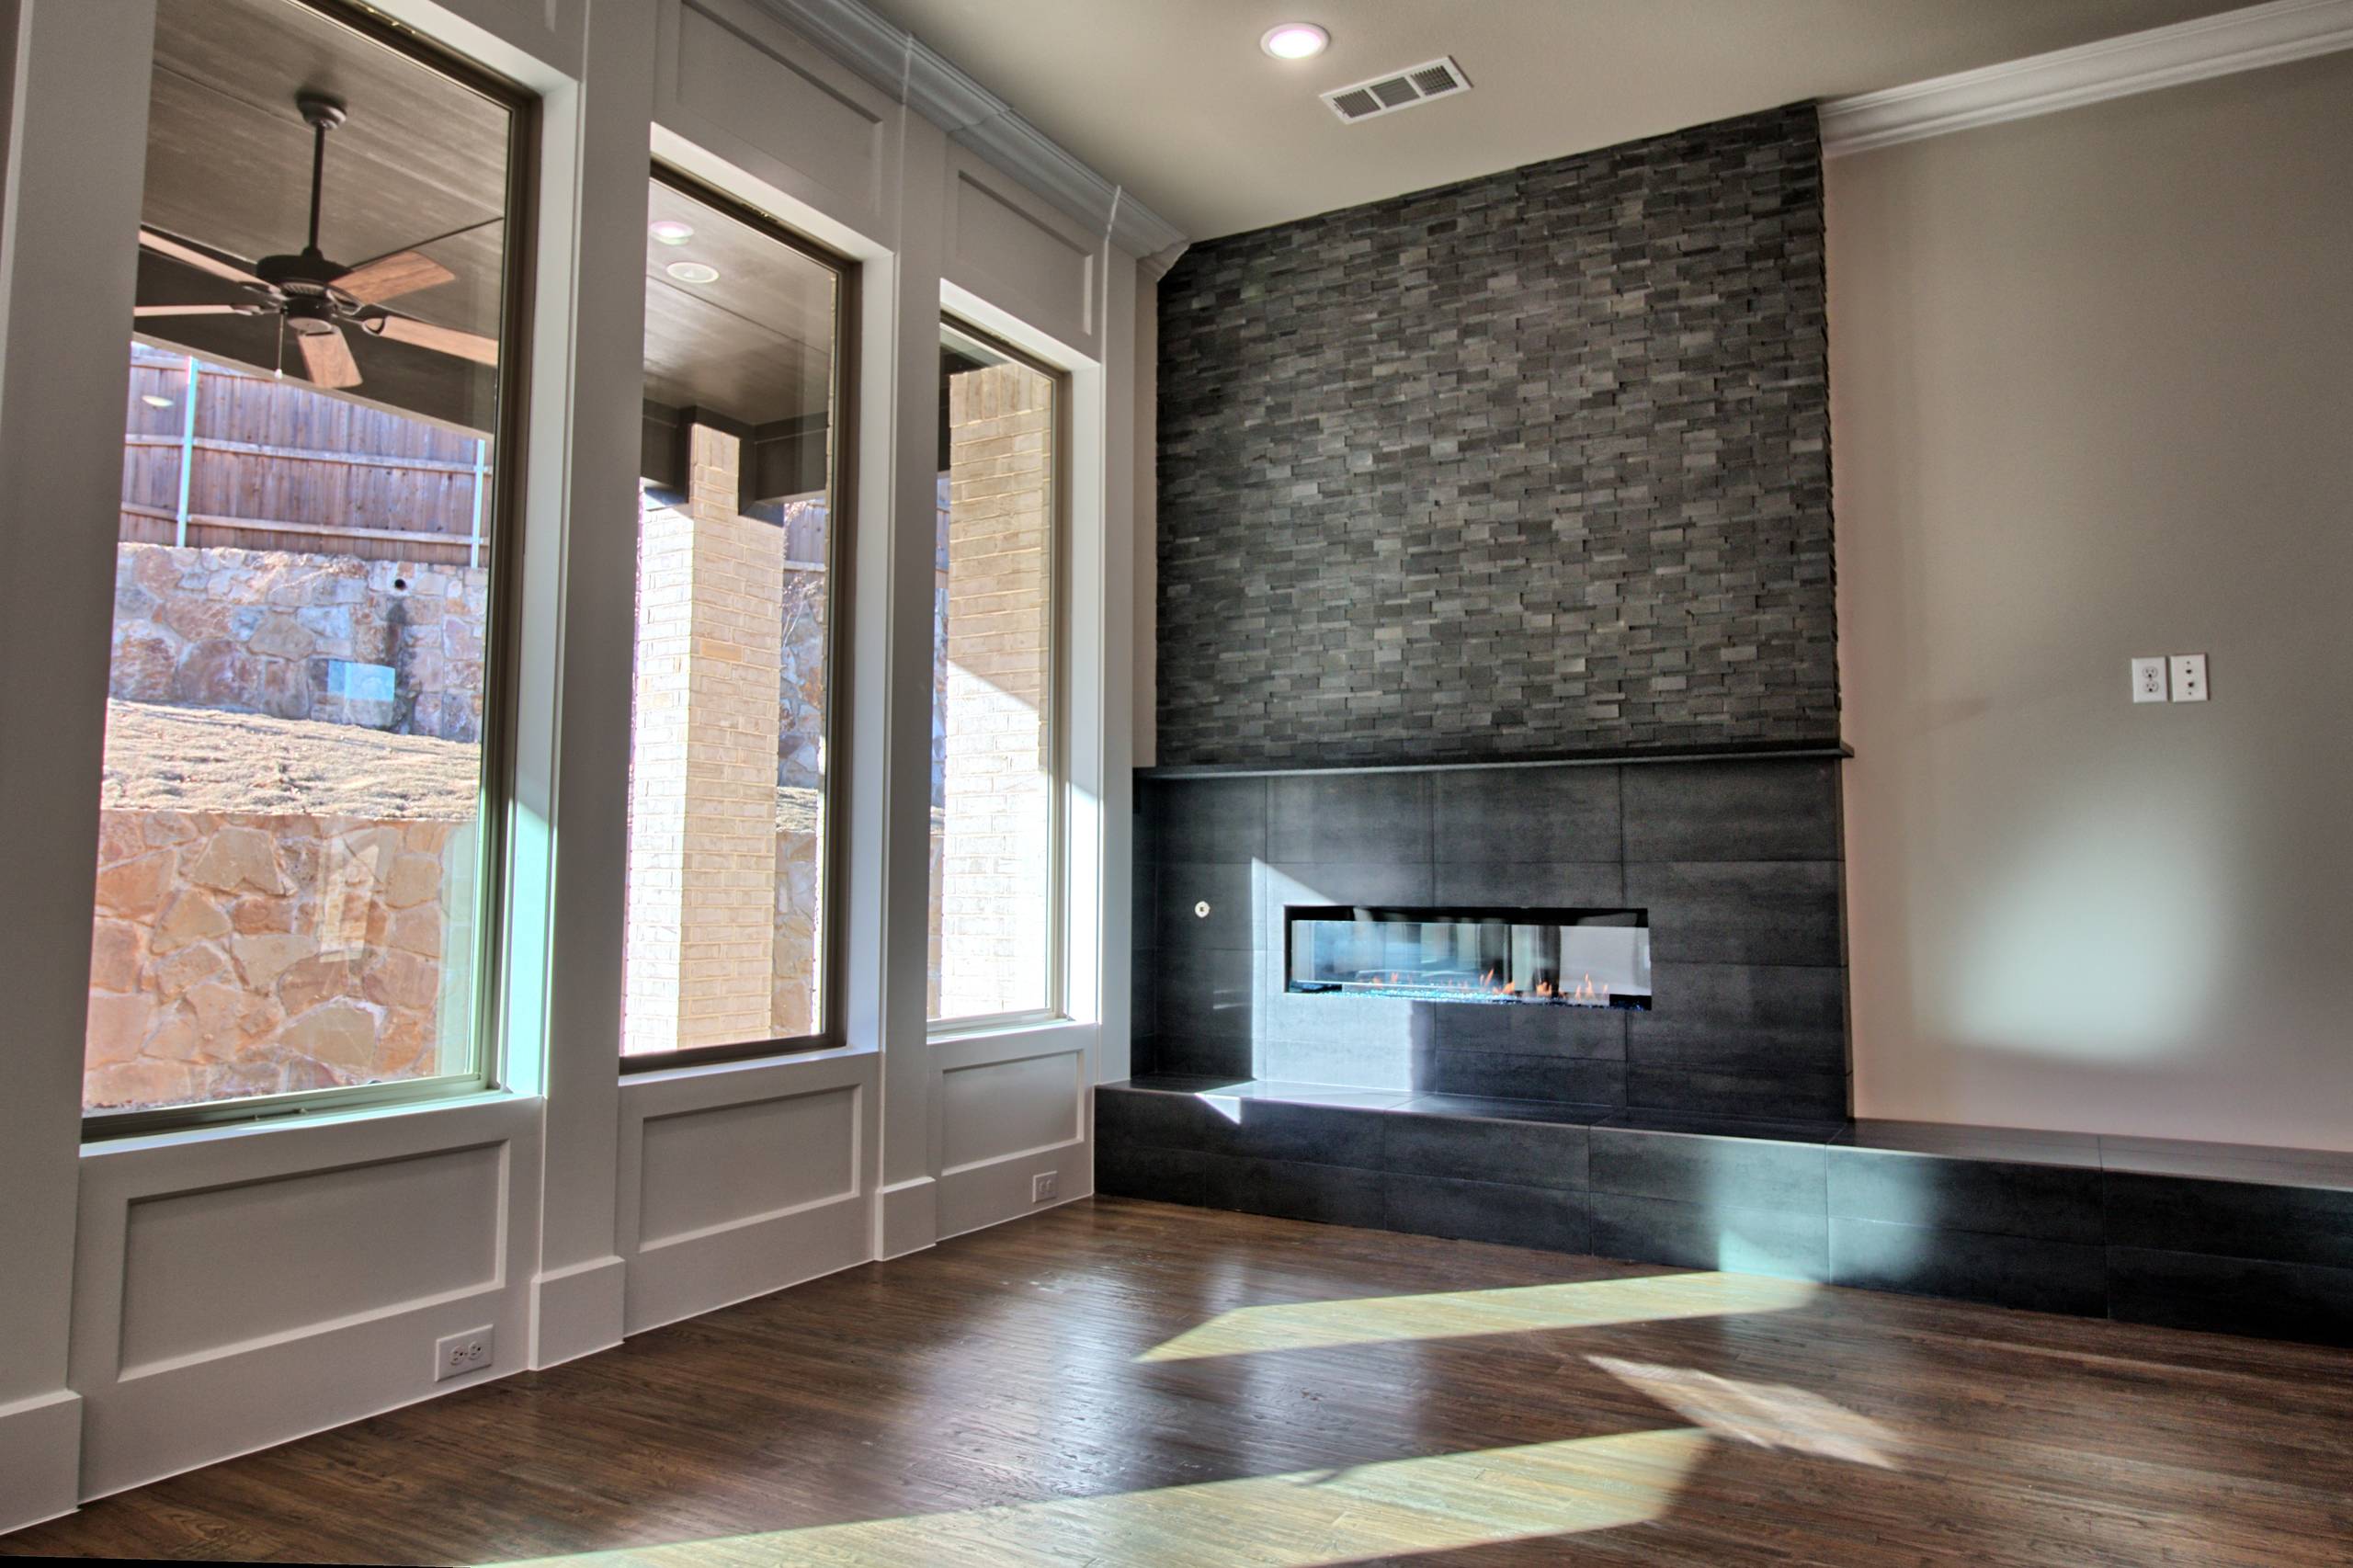 Woodland Hills Transitional With Contemporary Touches